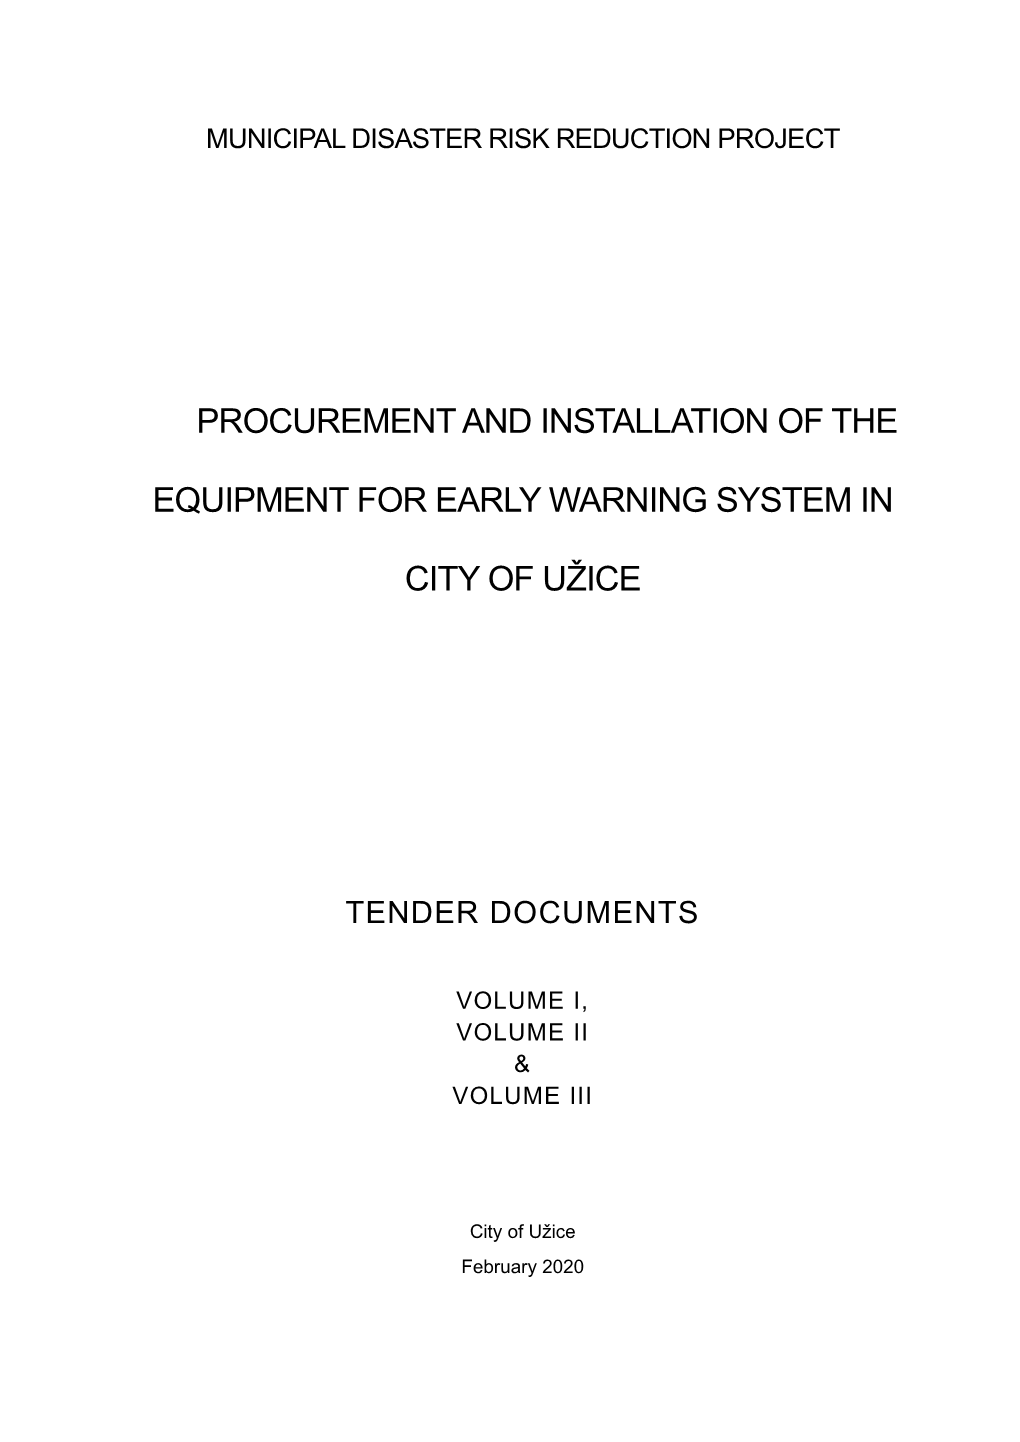 Procurement and Installation of The